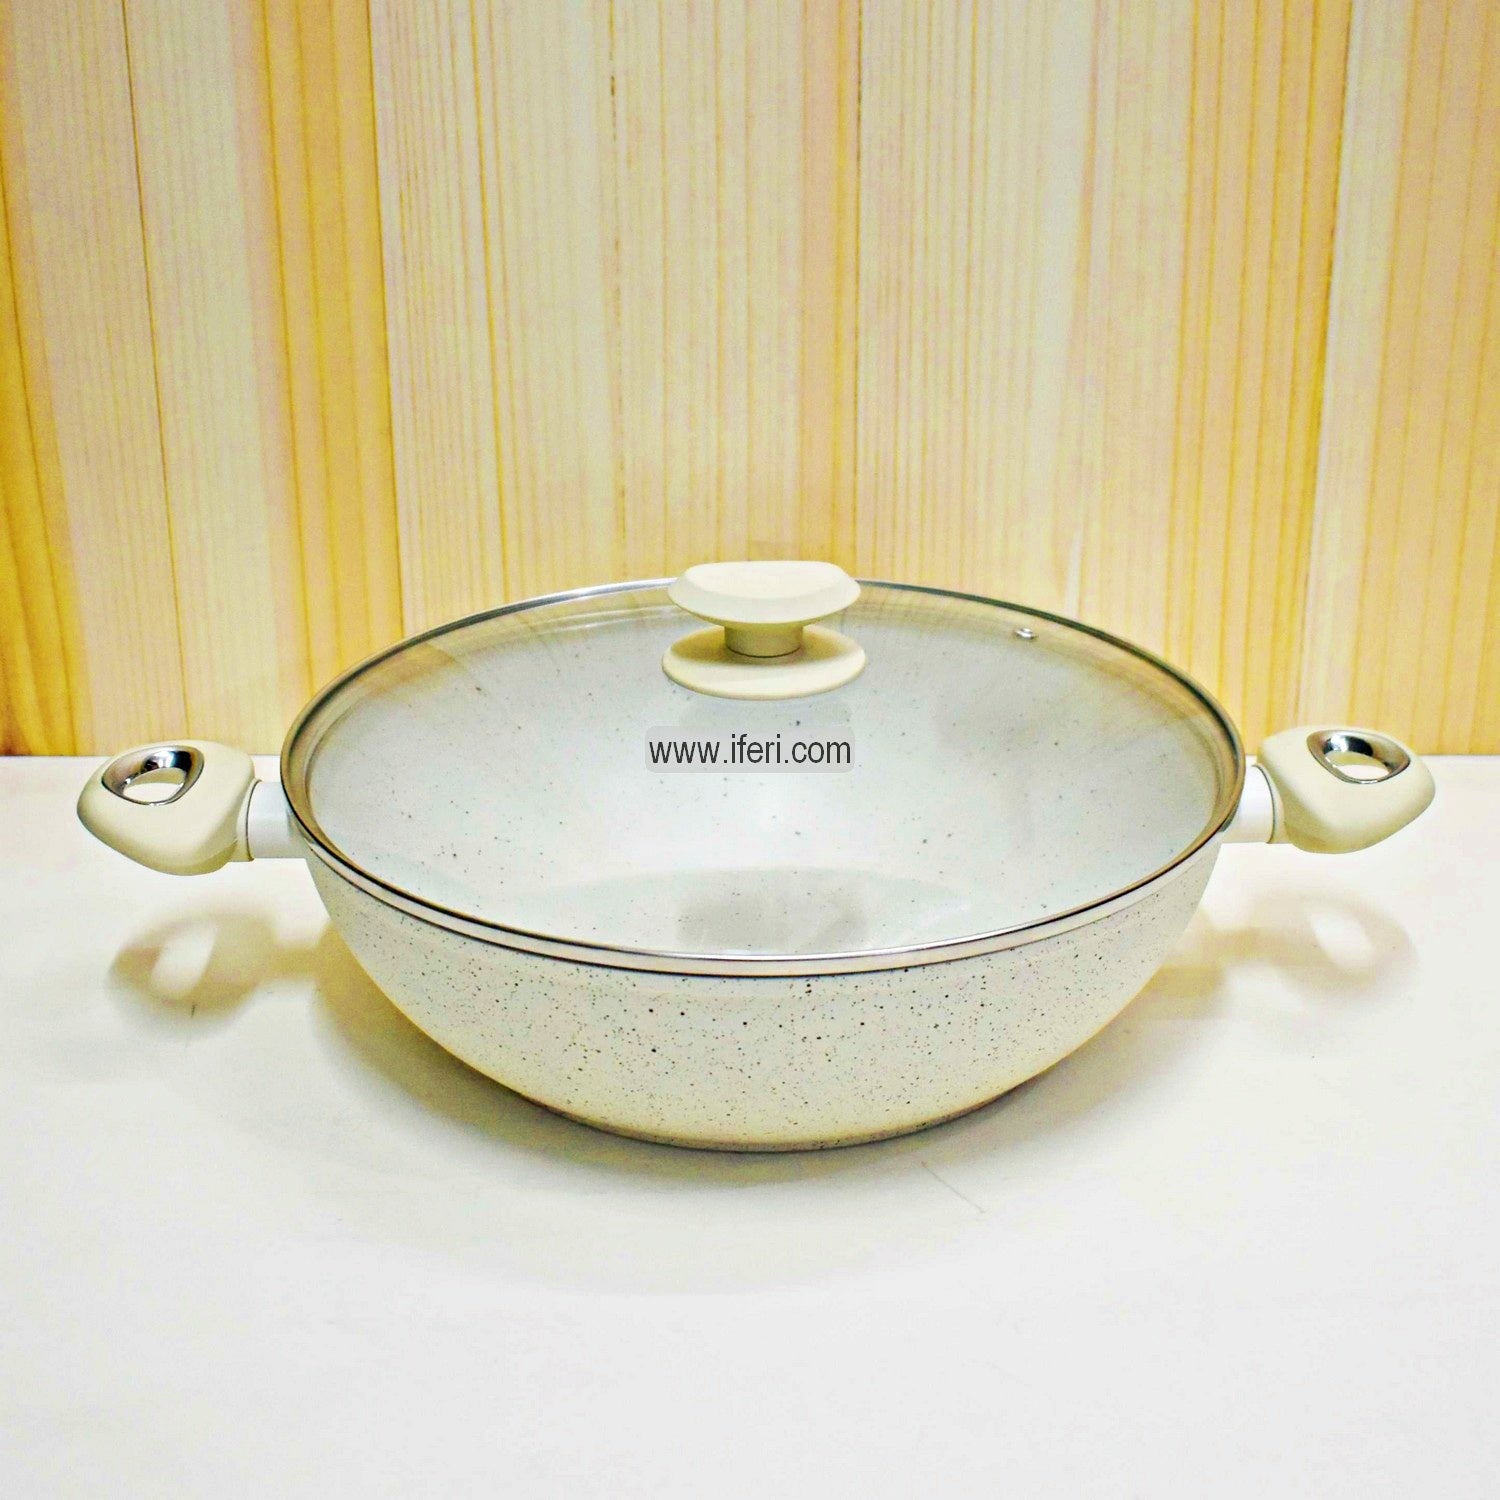 30 cm Maistic Non-Stick Cookware with Lid TG0750